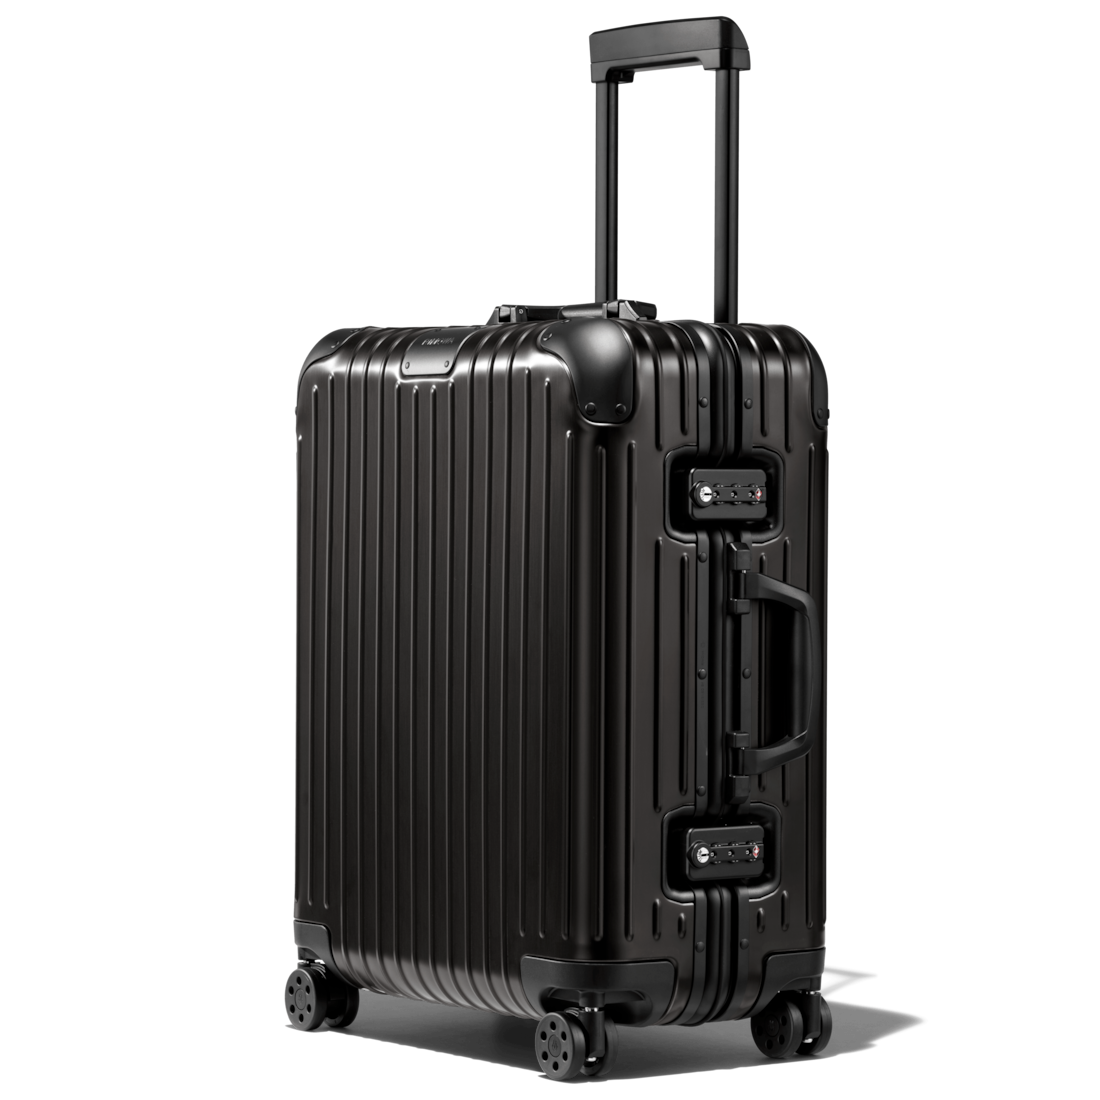 rimowa cabin luggage review